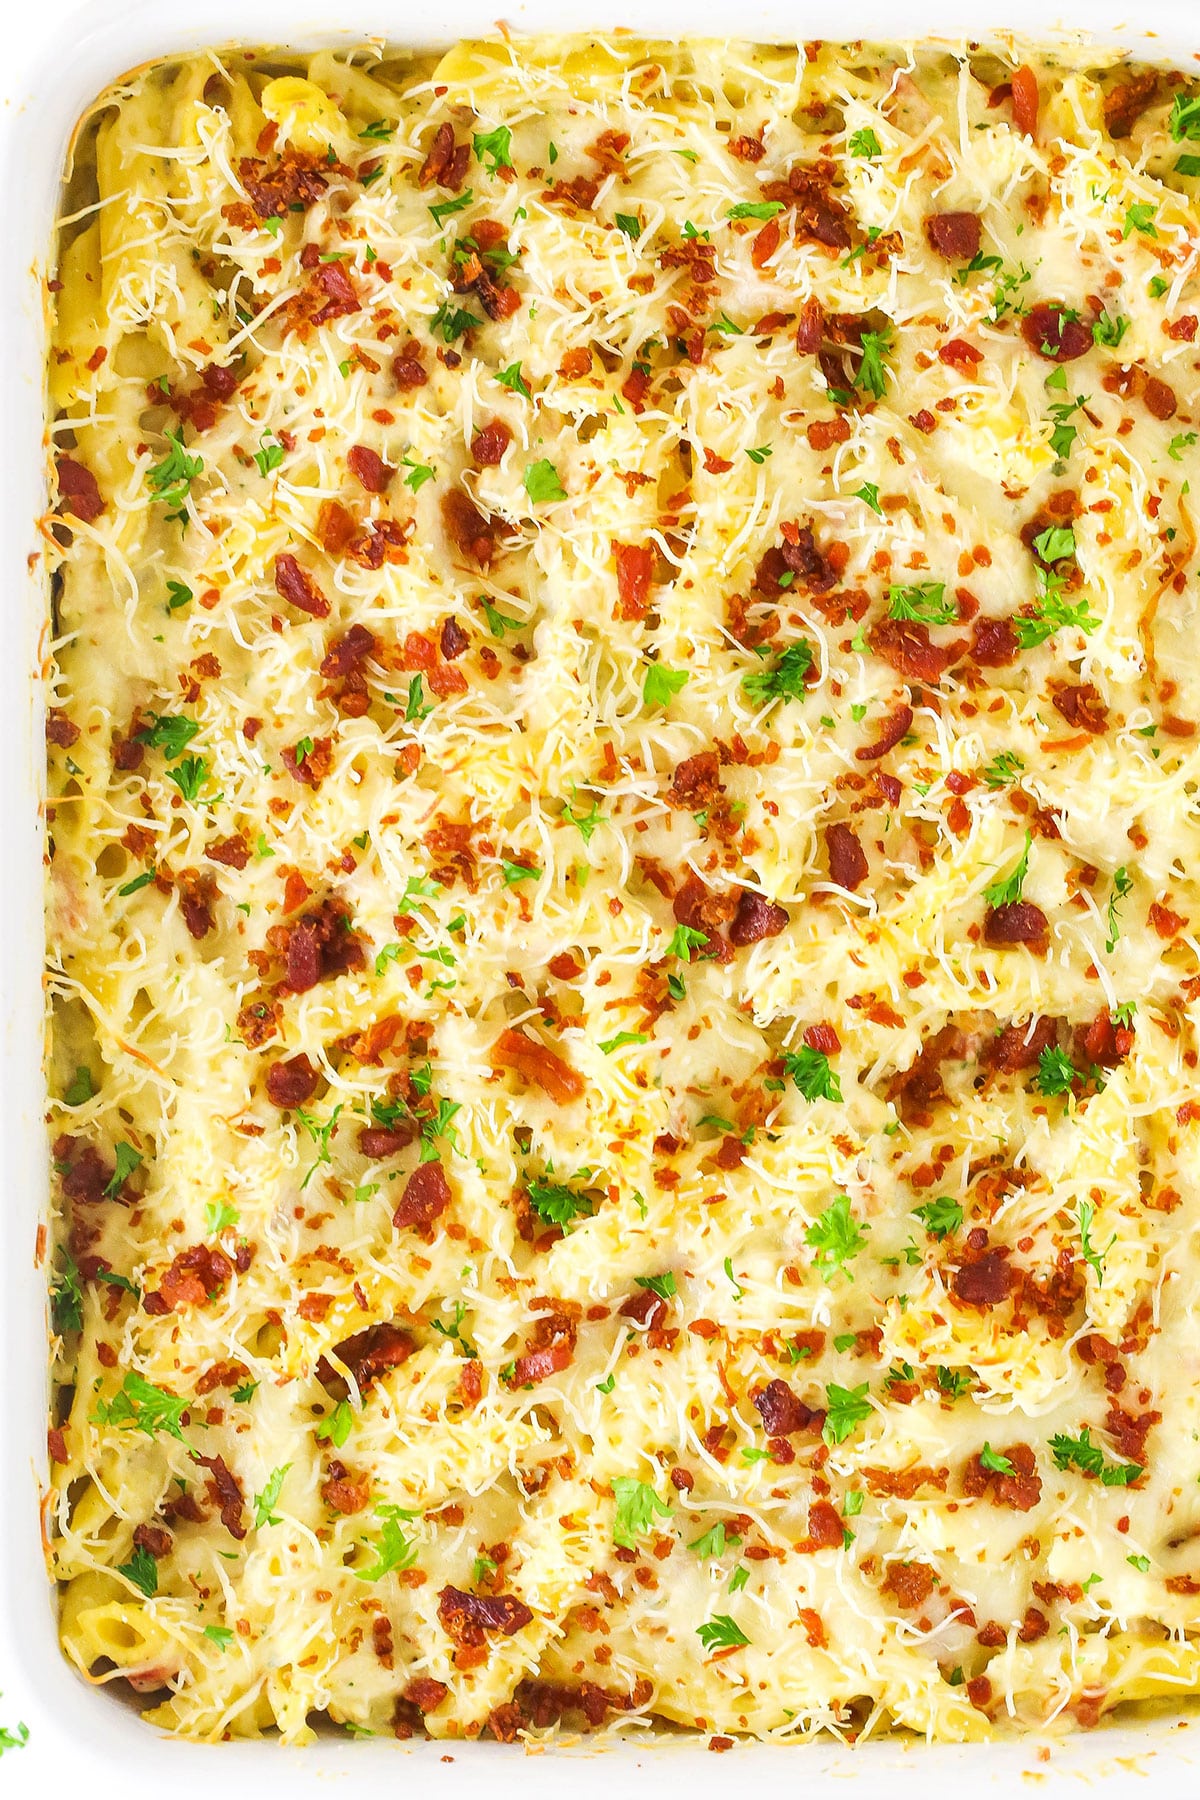 Overhead image of entire chicken bacon ranch casserole with shredded cheese and bacon bits on top.